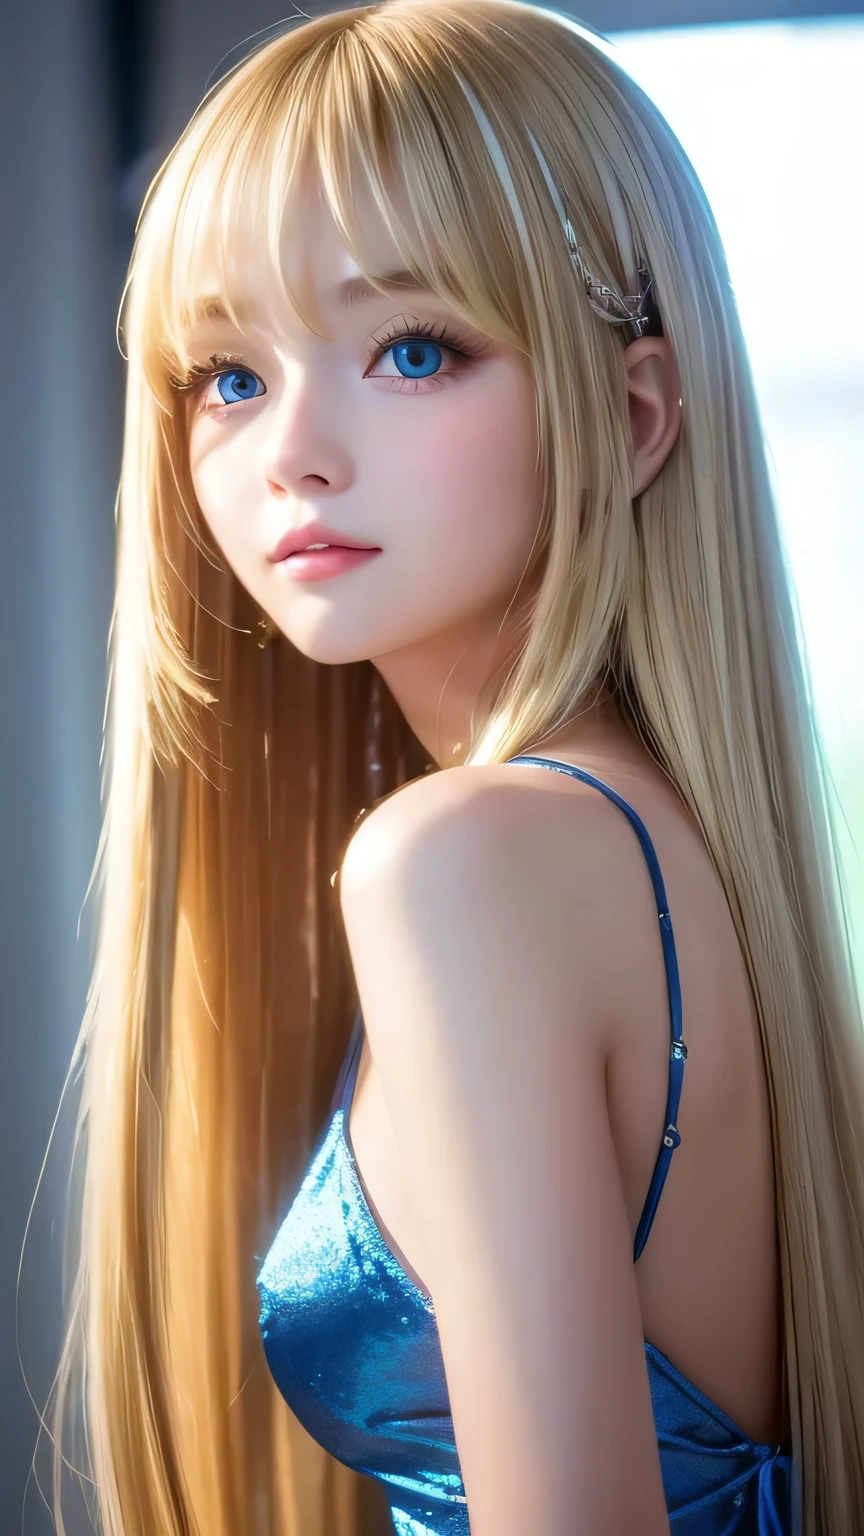 Silky skin、Sexy 18 years old cute sexy little beautiful face、Shiny hair dancing in front of a pretty face、Long, silky bangs that cover the eyes、Hair that hides the face、Too long hair、Sexy cute young woman、Long blonde shiny bright hair、Big, bright, light blue eyes that shine beautifully、